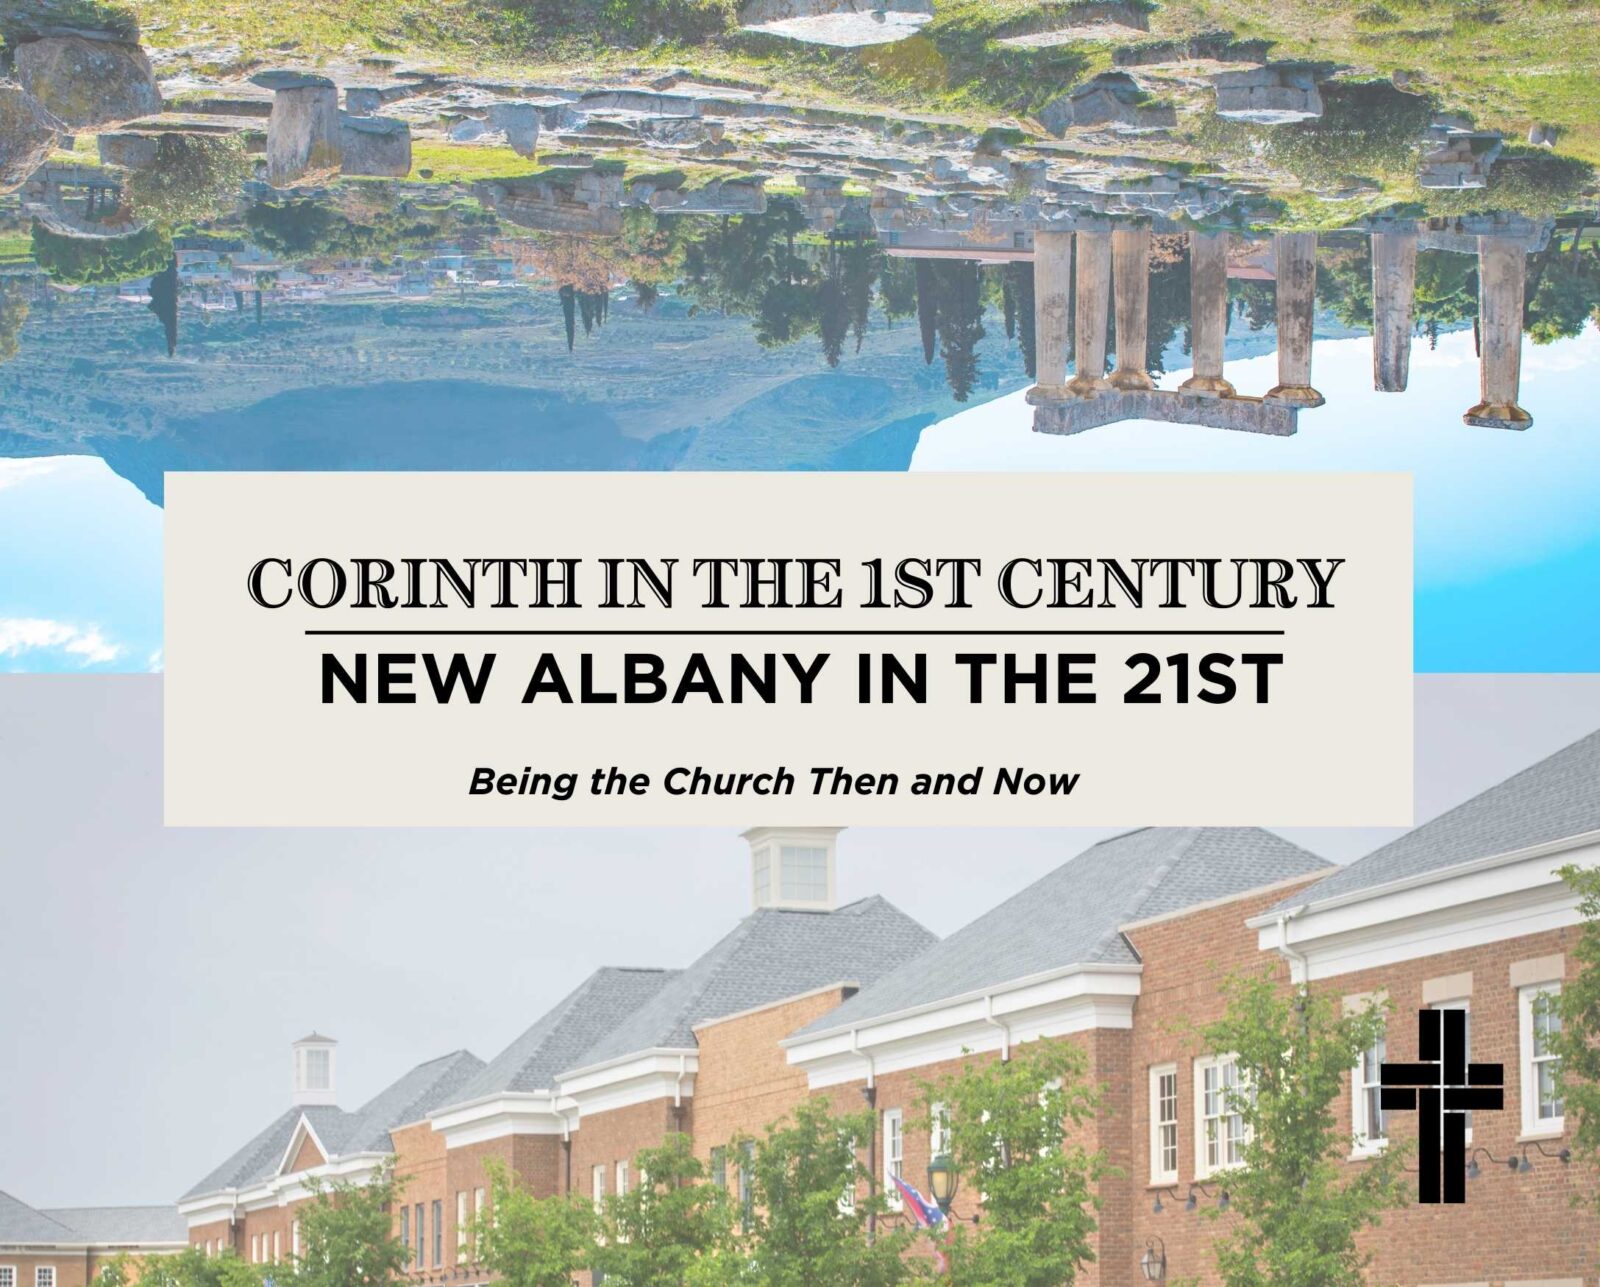 Corinth in the 1st Century, New Albany in the 21st